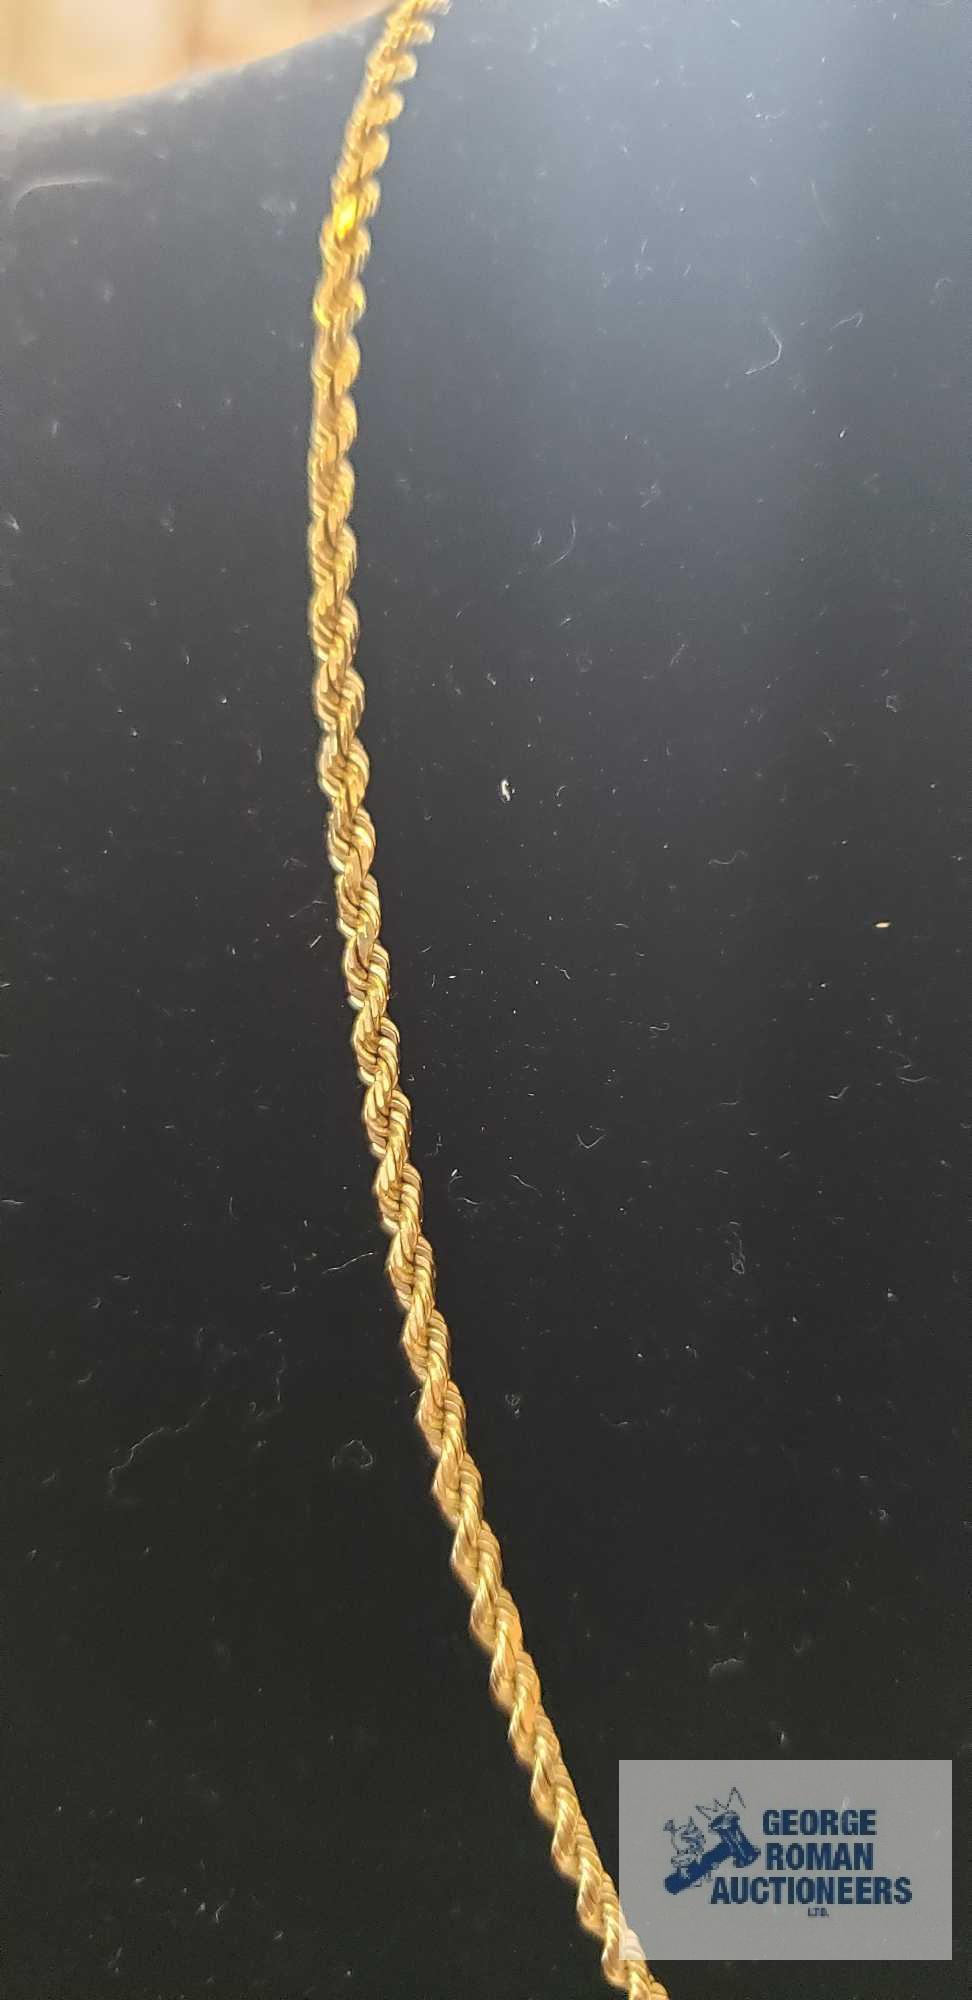 Gold colored rope necklace, marked 14K, approximate total weight 6.64 G